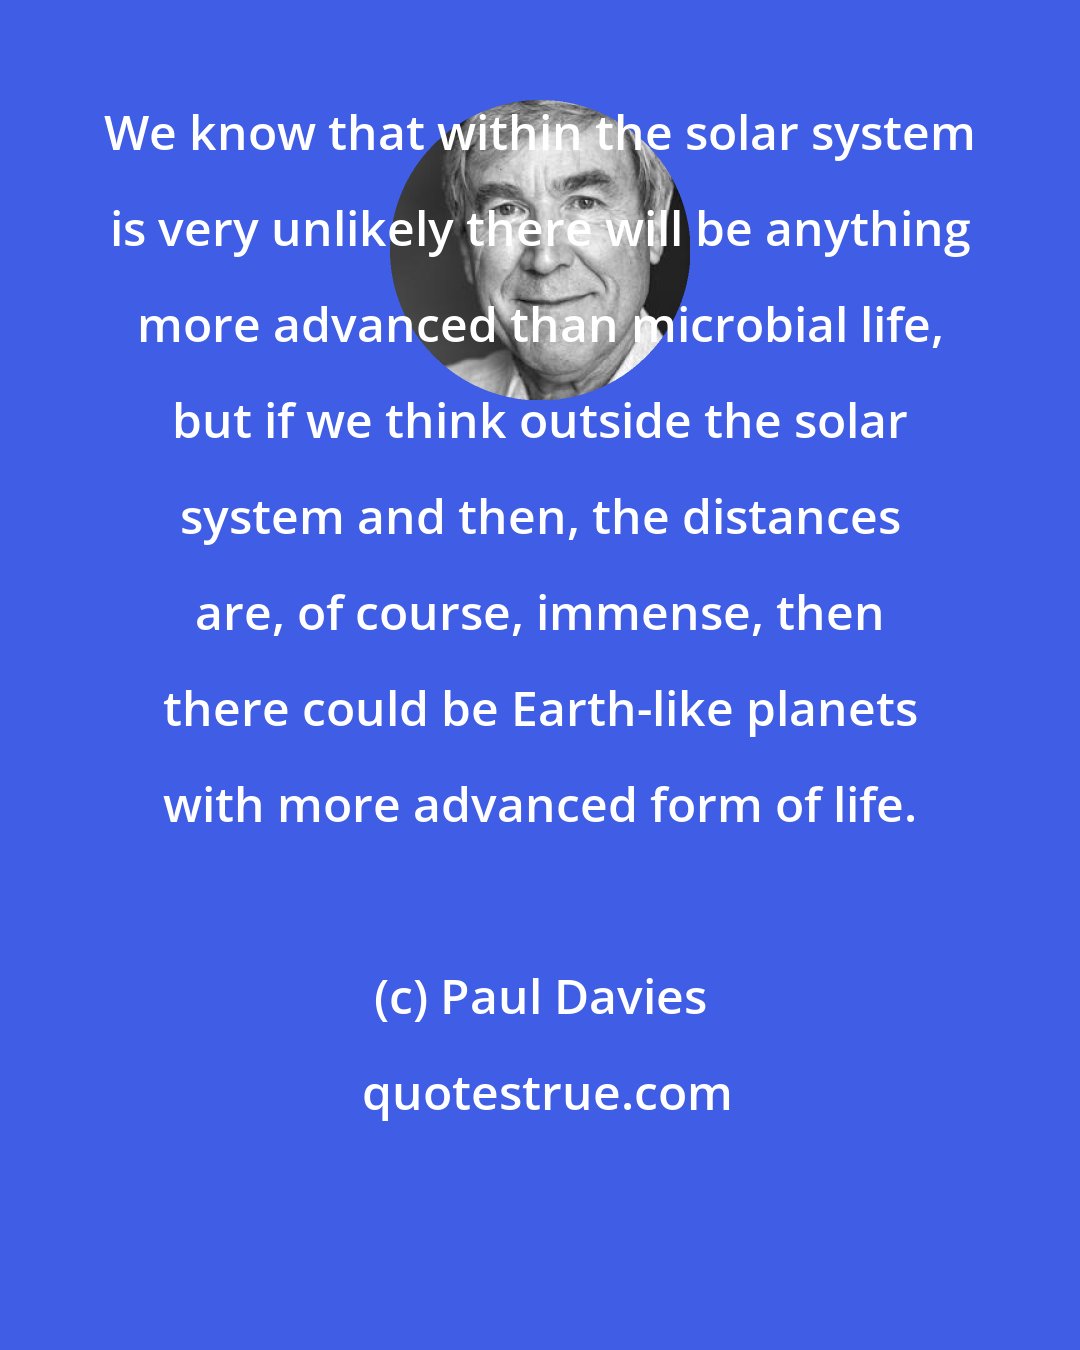 Paul Davies: We know that within the solar system is very unlikely there will be anything more advanced than microbial life, but if we think outside the solar system and then, the distances are, of course, immense, then there could be Earth-like planets with more advanced form of life.